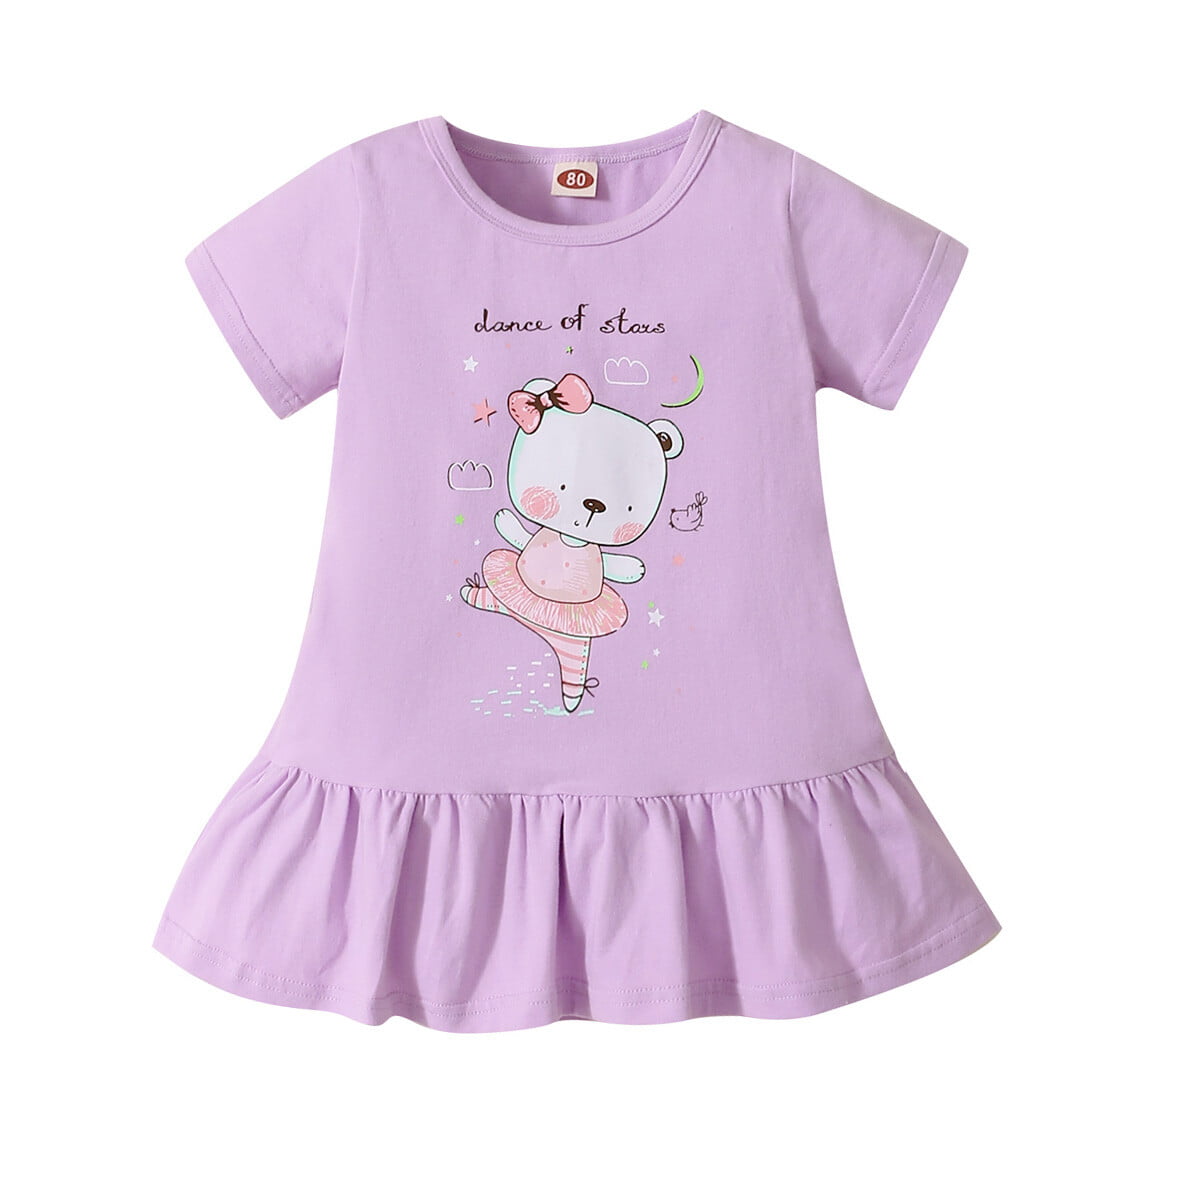 Baby Clothes Girl Baby Girl Clothes Newborn Girl Outfit Baby Girl Clothes Summer Baby Girl Outfits Infant Girl Clothes Baby Clothes